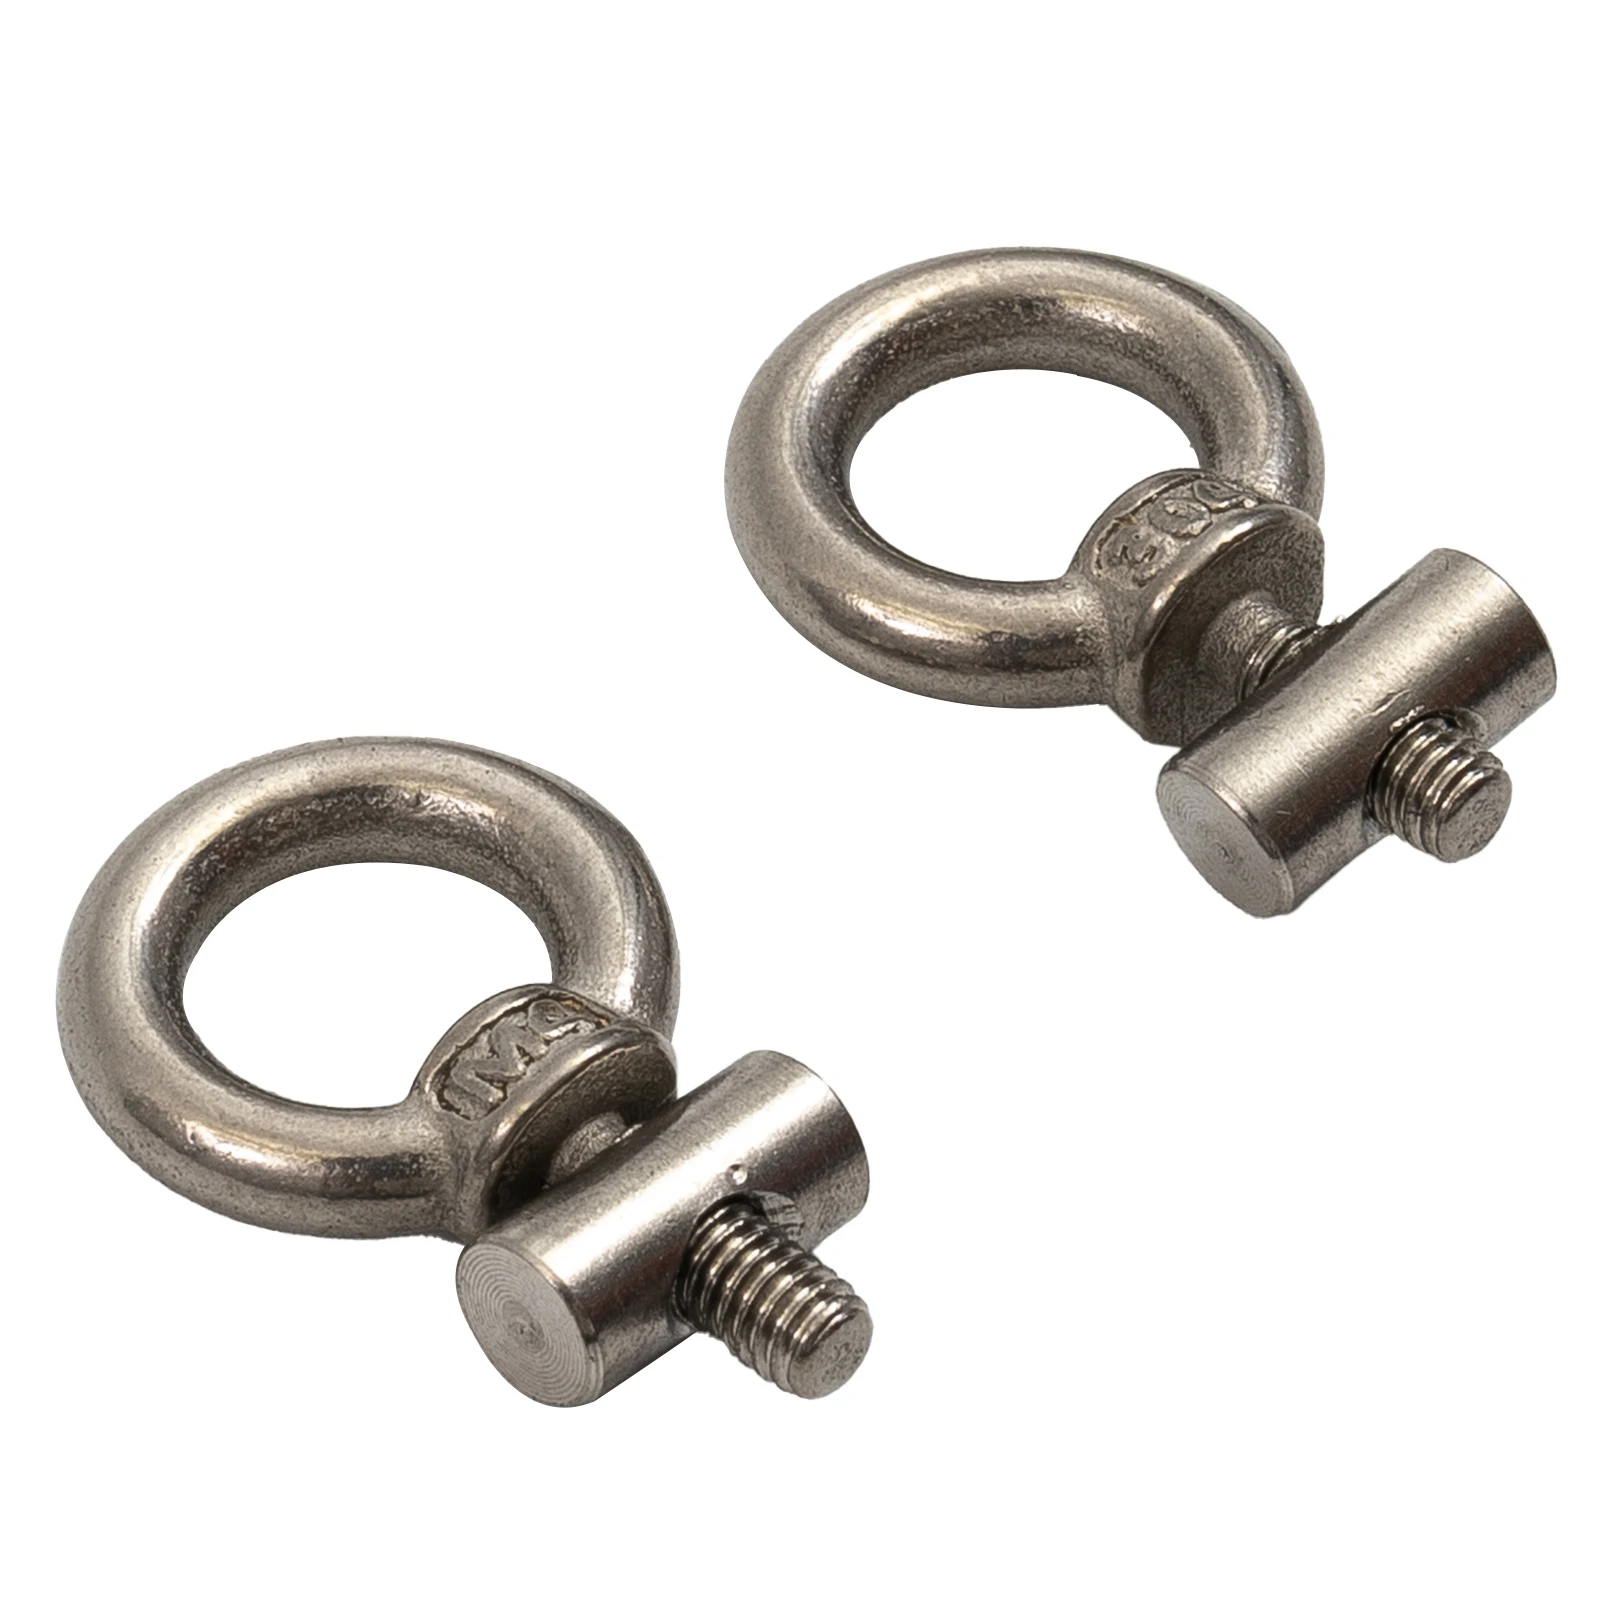 

2-6pcs Stainless Steel Awning Rail Stoppers Tent Fixing Tool 6mm Stops Motorhome Campervan Caravan Accessories